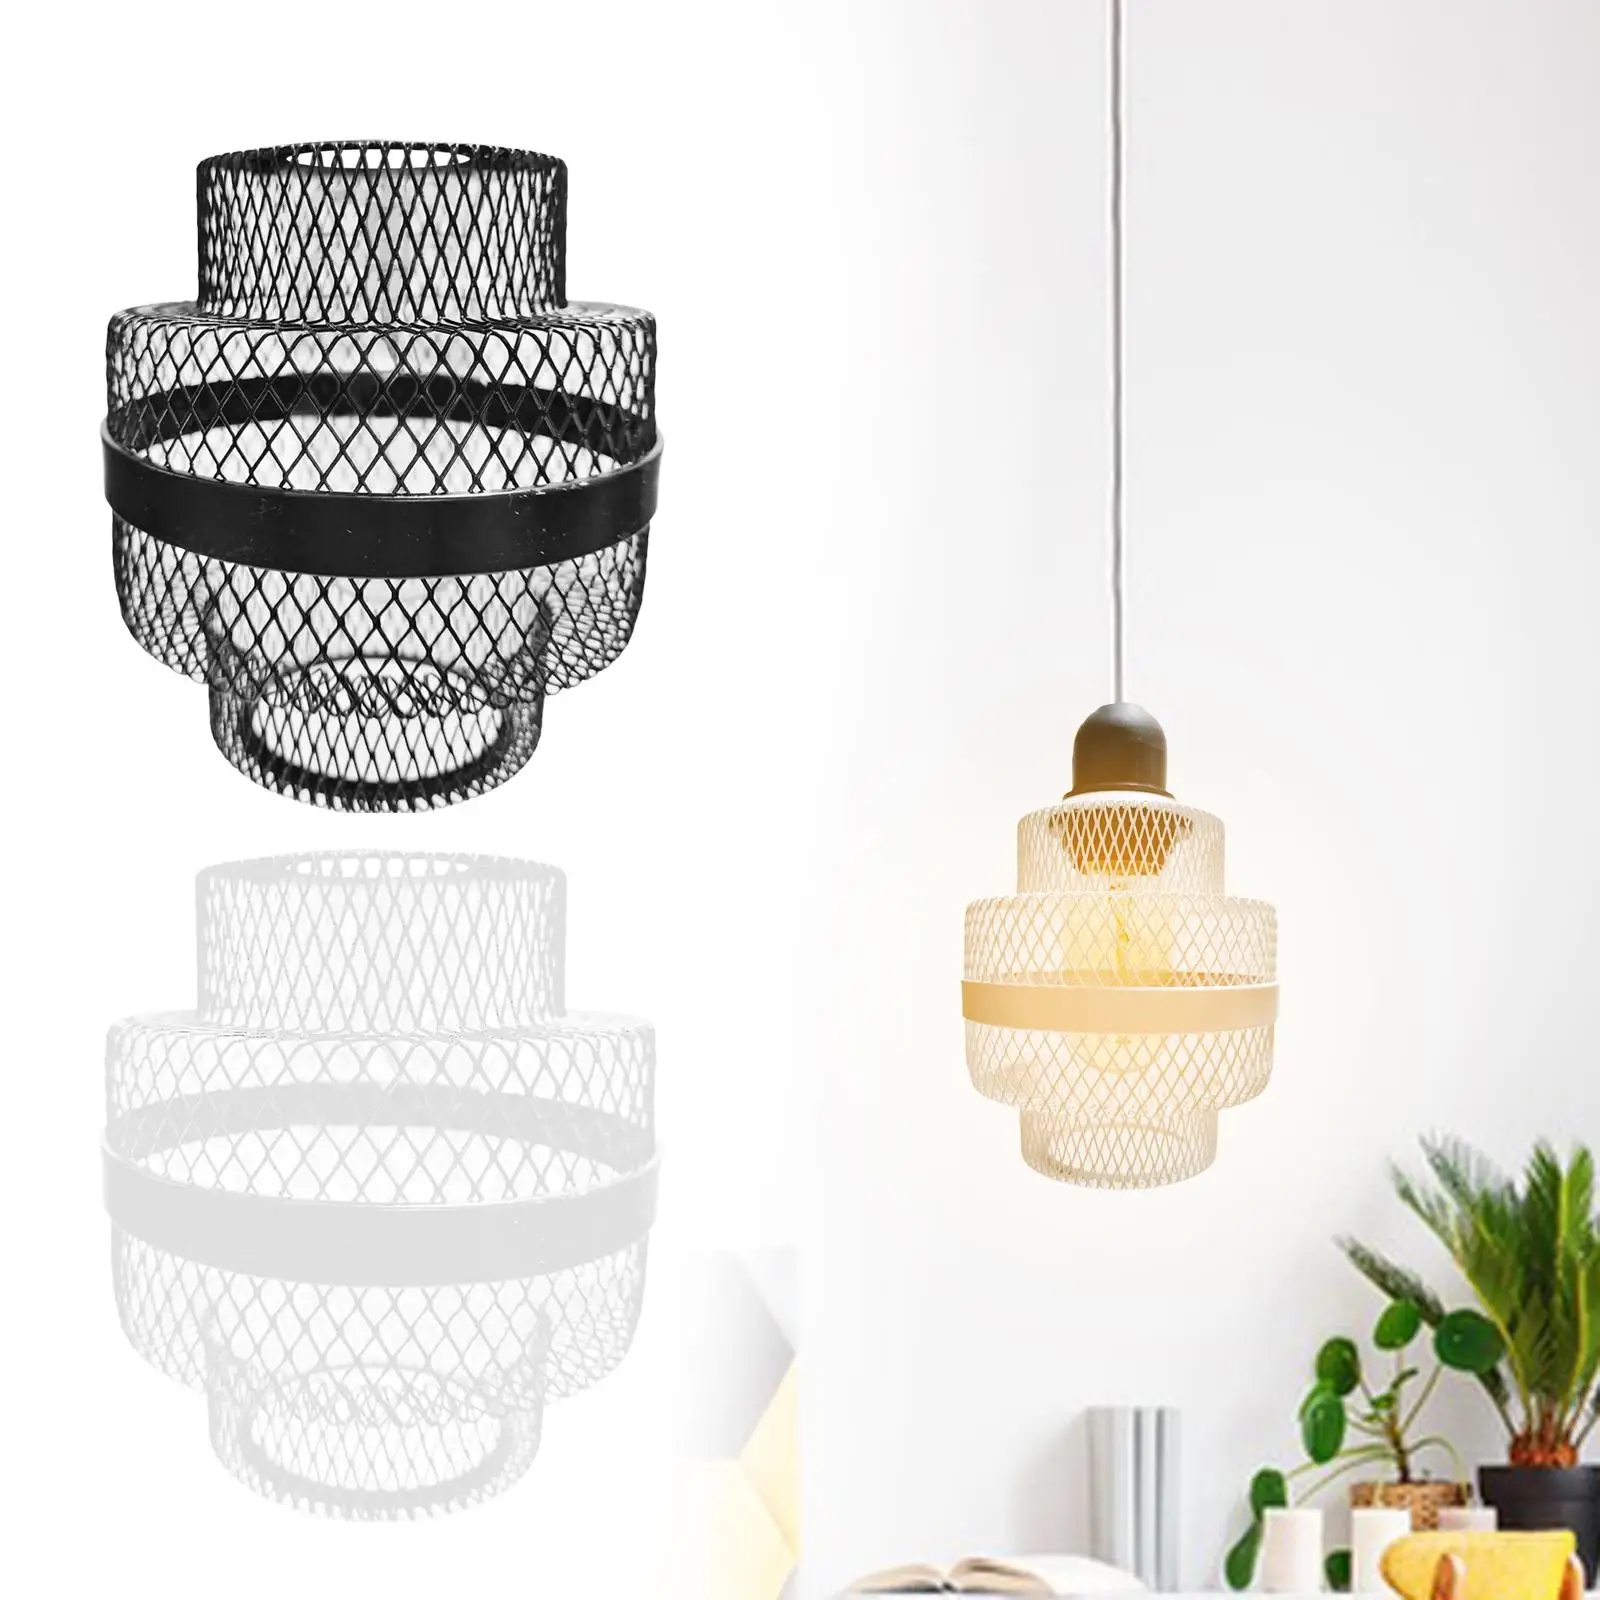 Metal Wire Light Cage Lamp Holder Fitting Ceiling Light Fixtures Lamp Shade Hanging Pendant Light Cover for Hotel Home Wall Lamp